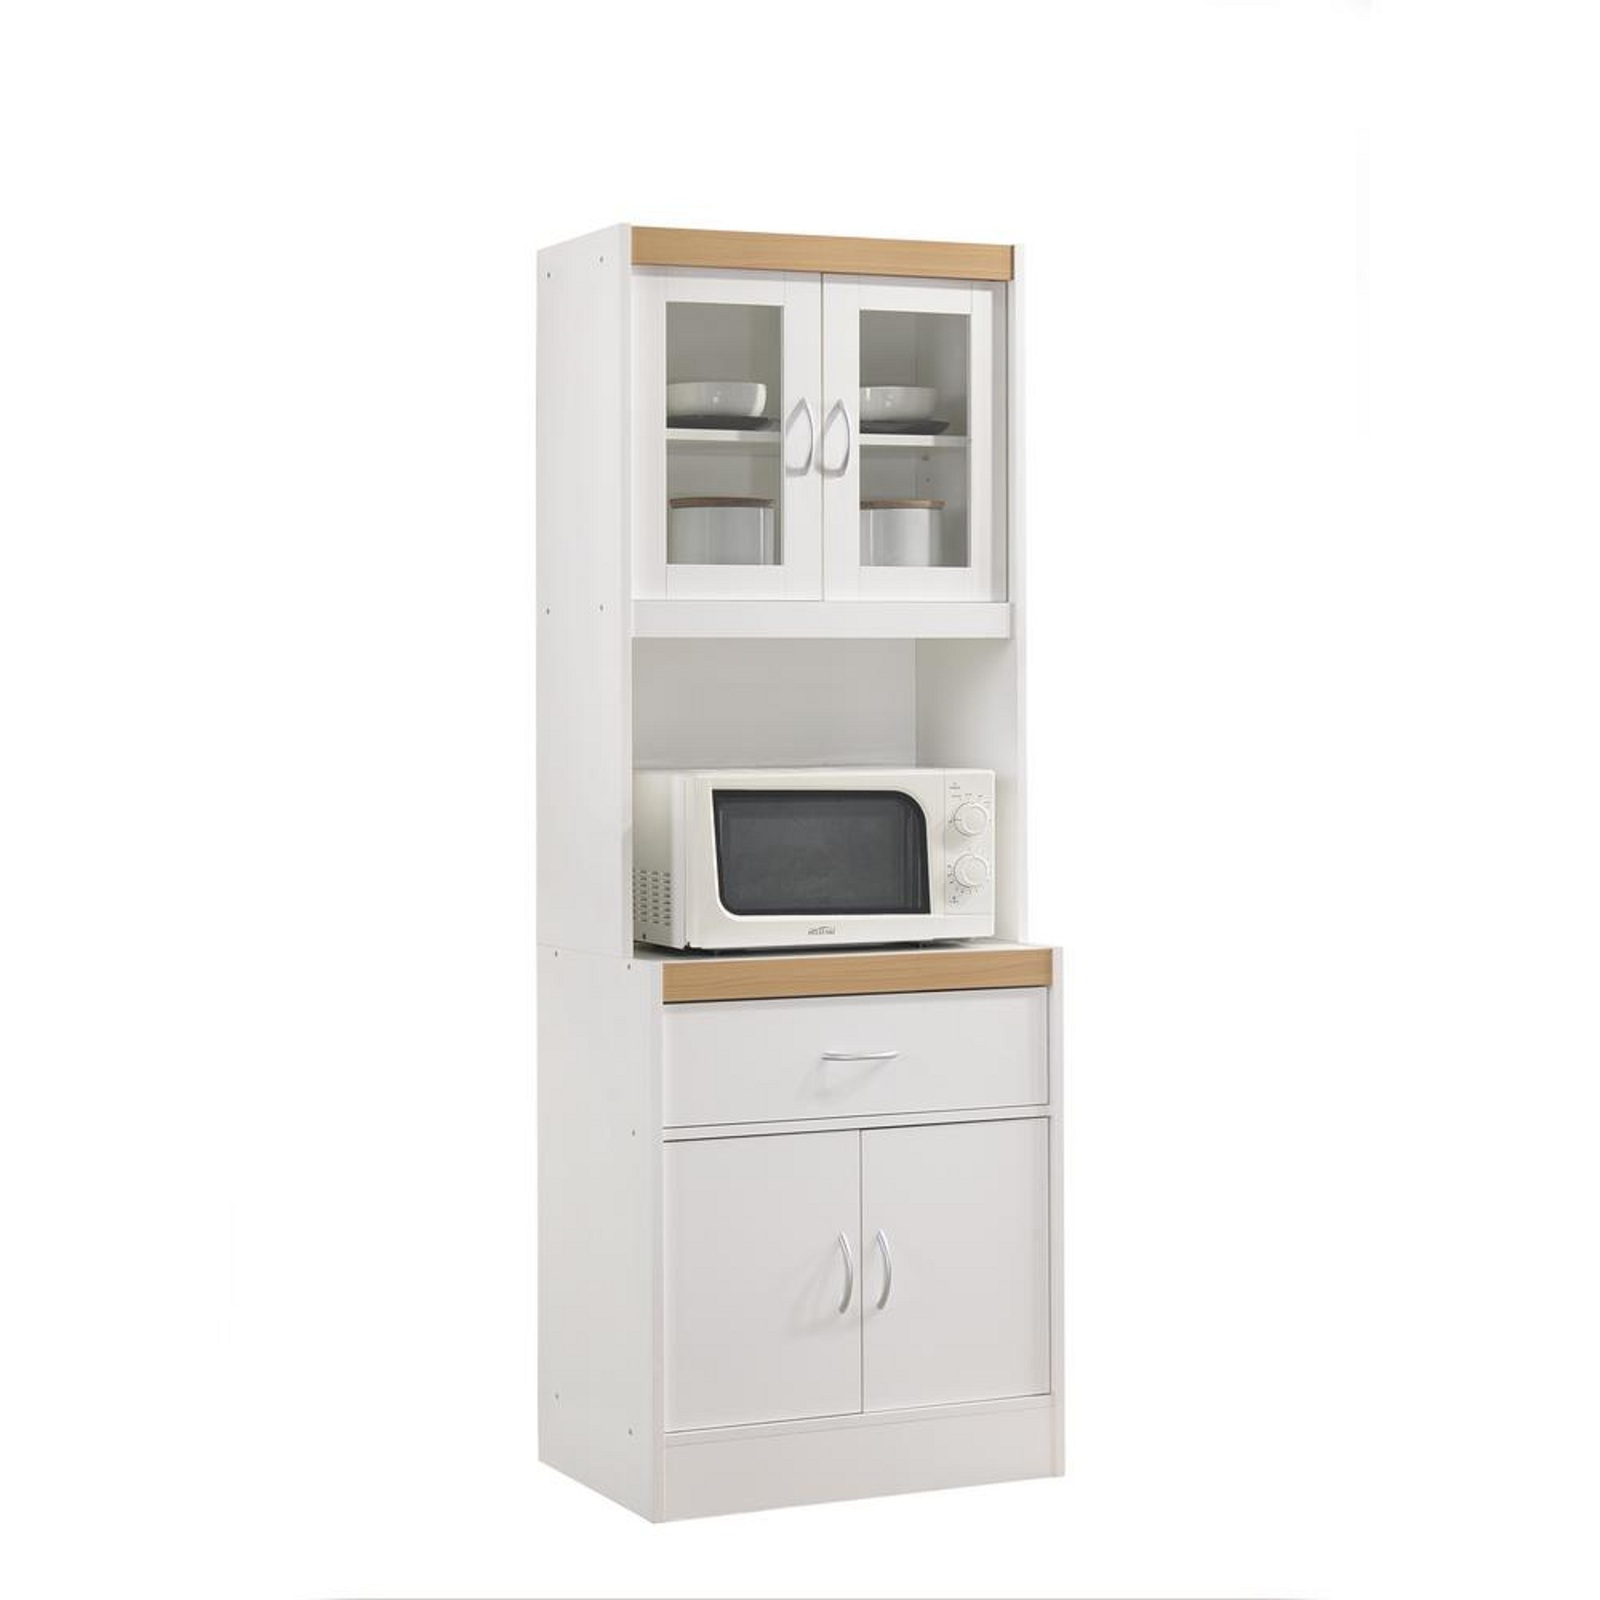 Buffet Cabinet Storage with Microwave Shelf Space Saver Kitchen Tall ...